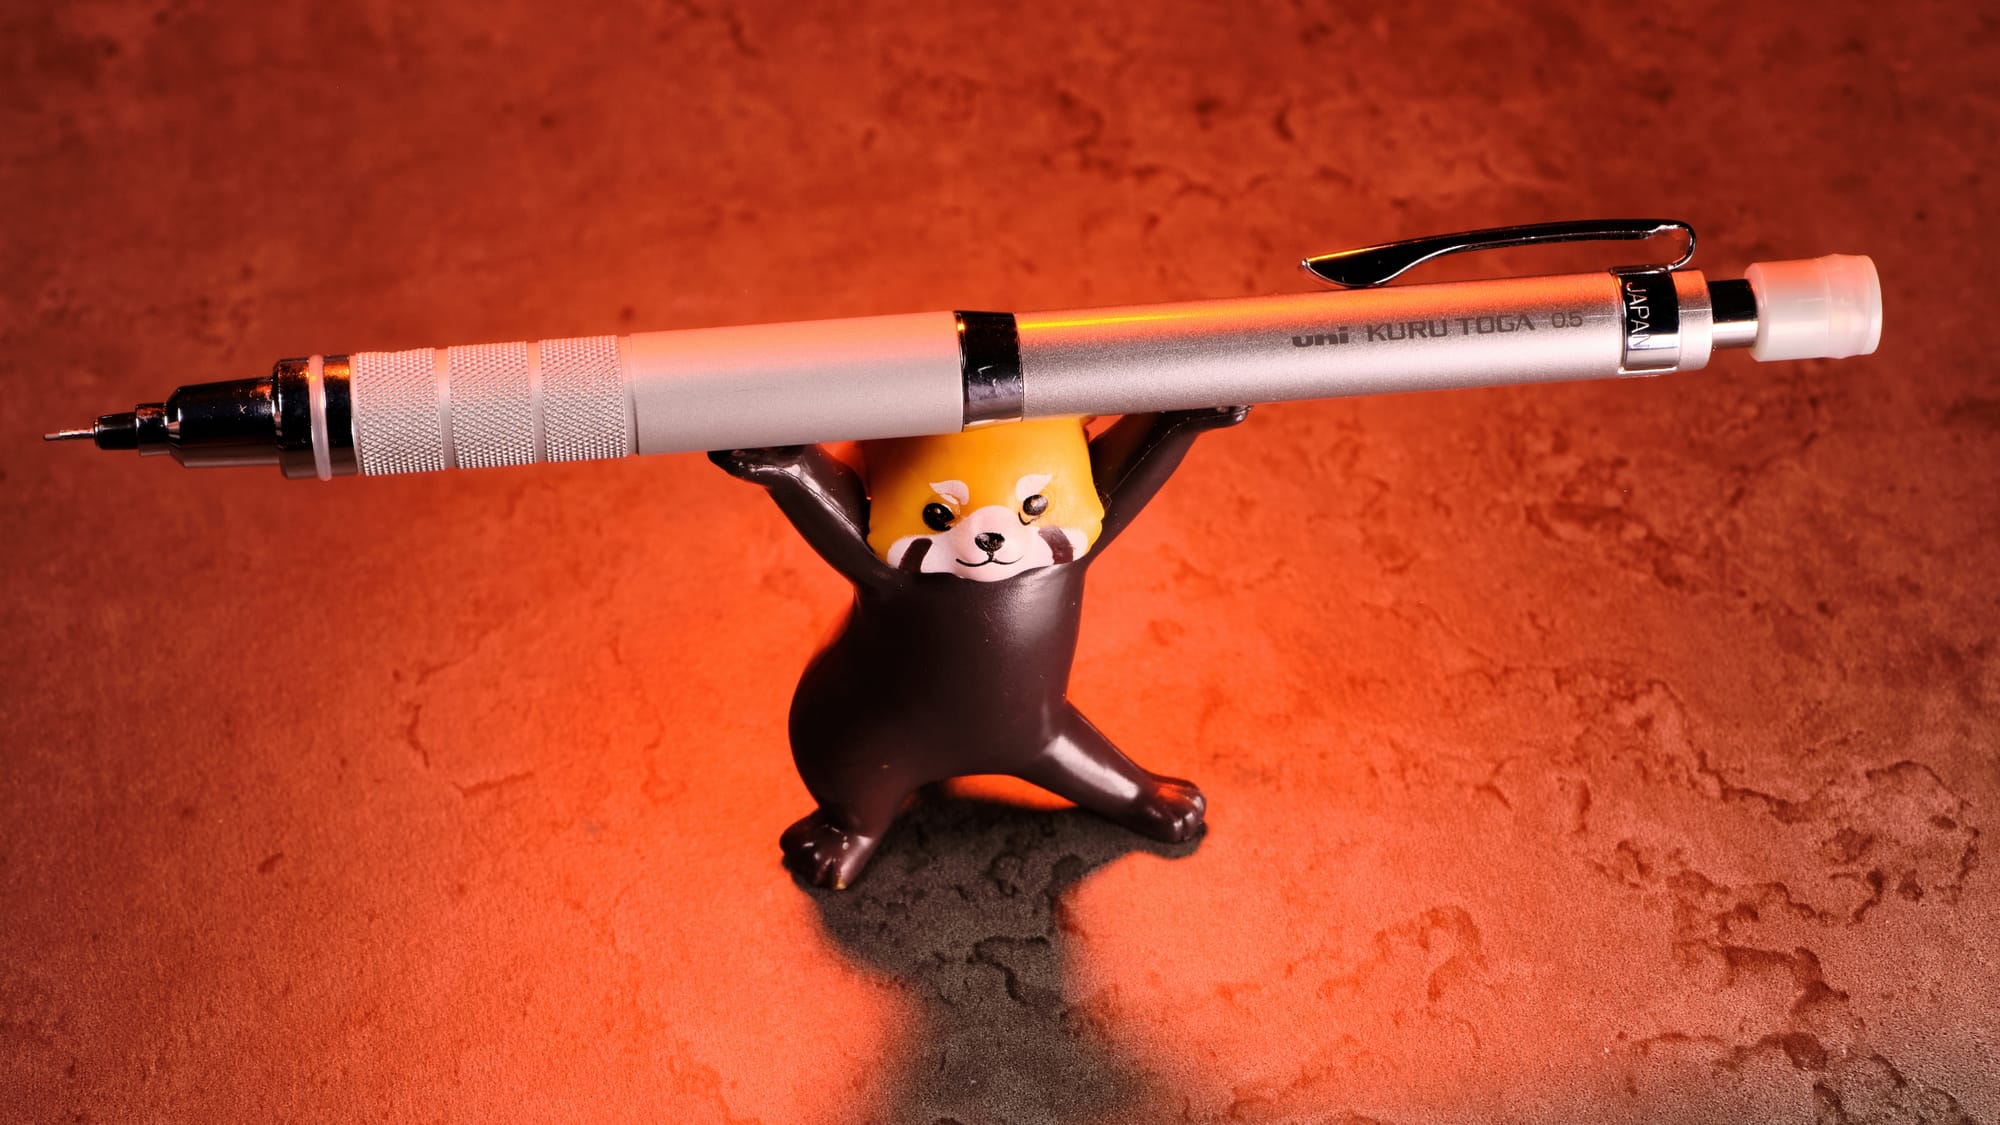 Photo of the Kuru Toga Roulette being held up by a Red Panda figure, with an orange marbled background